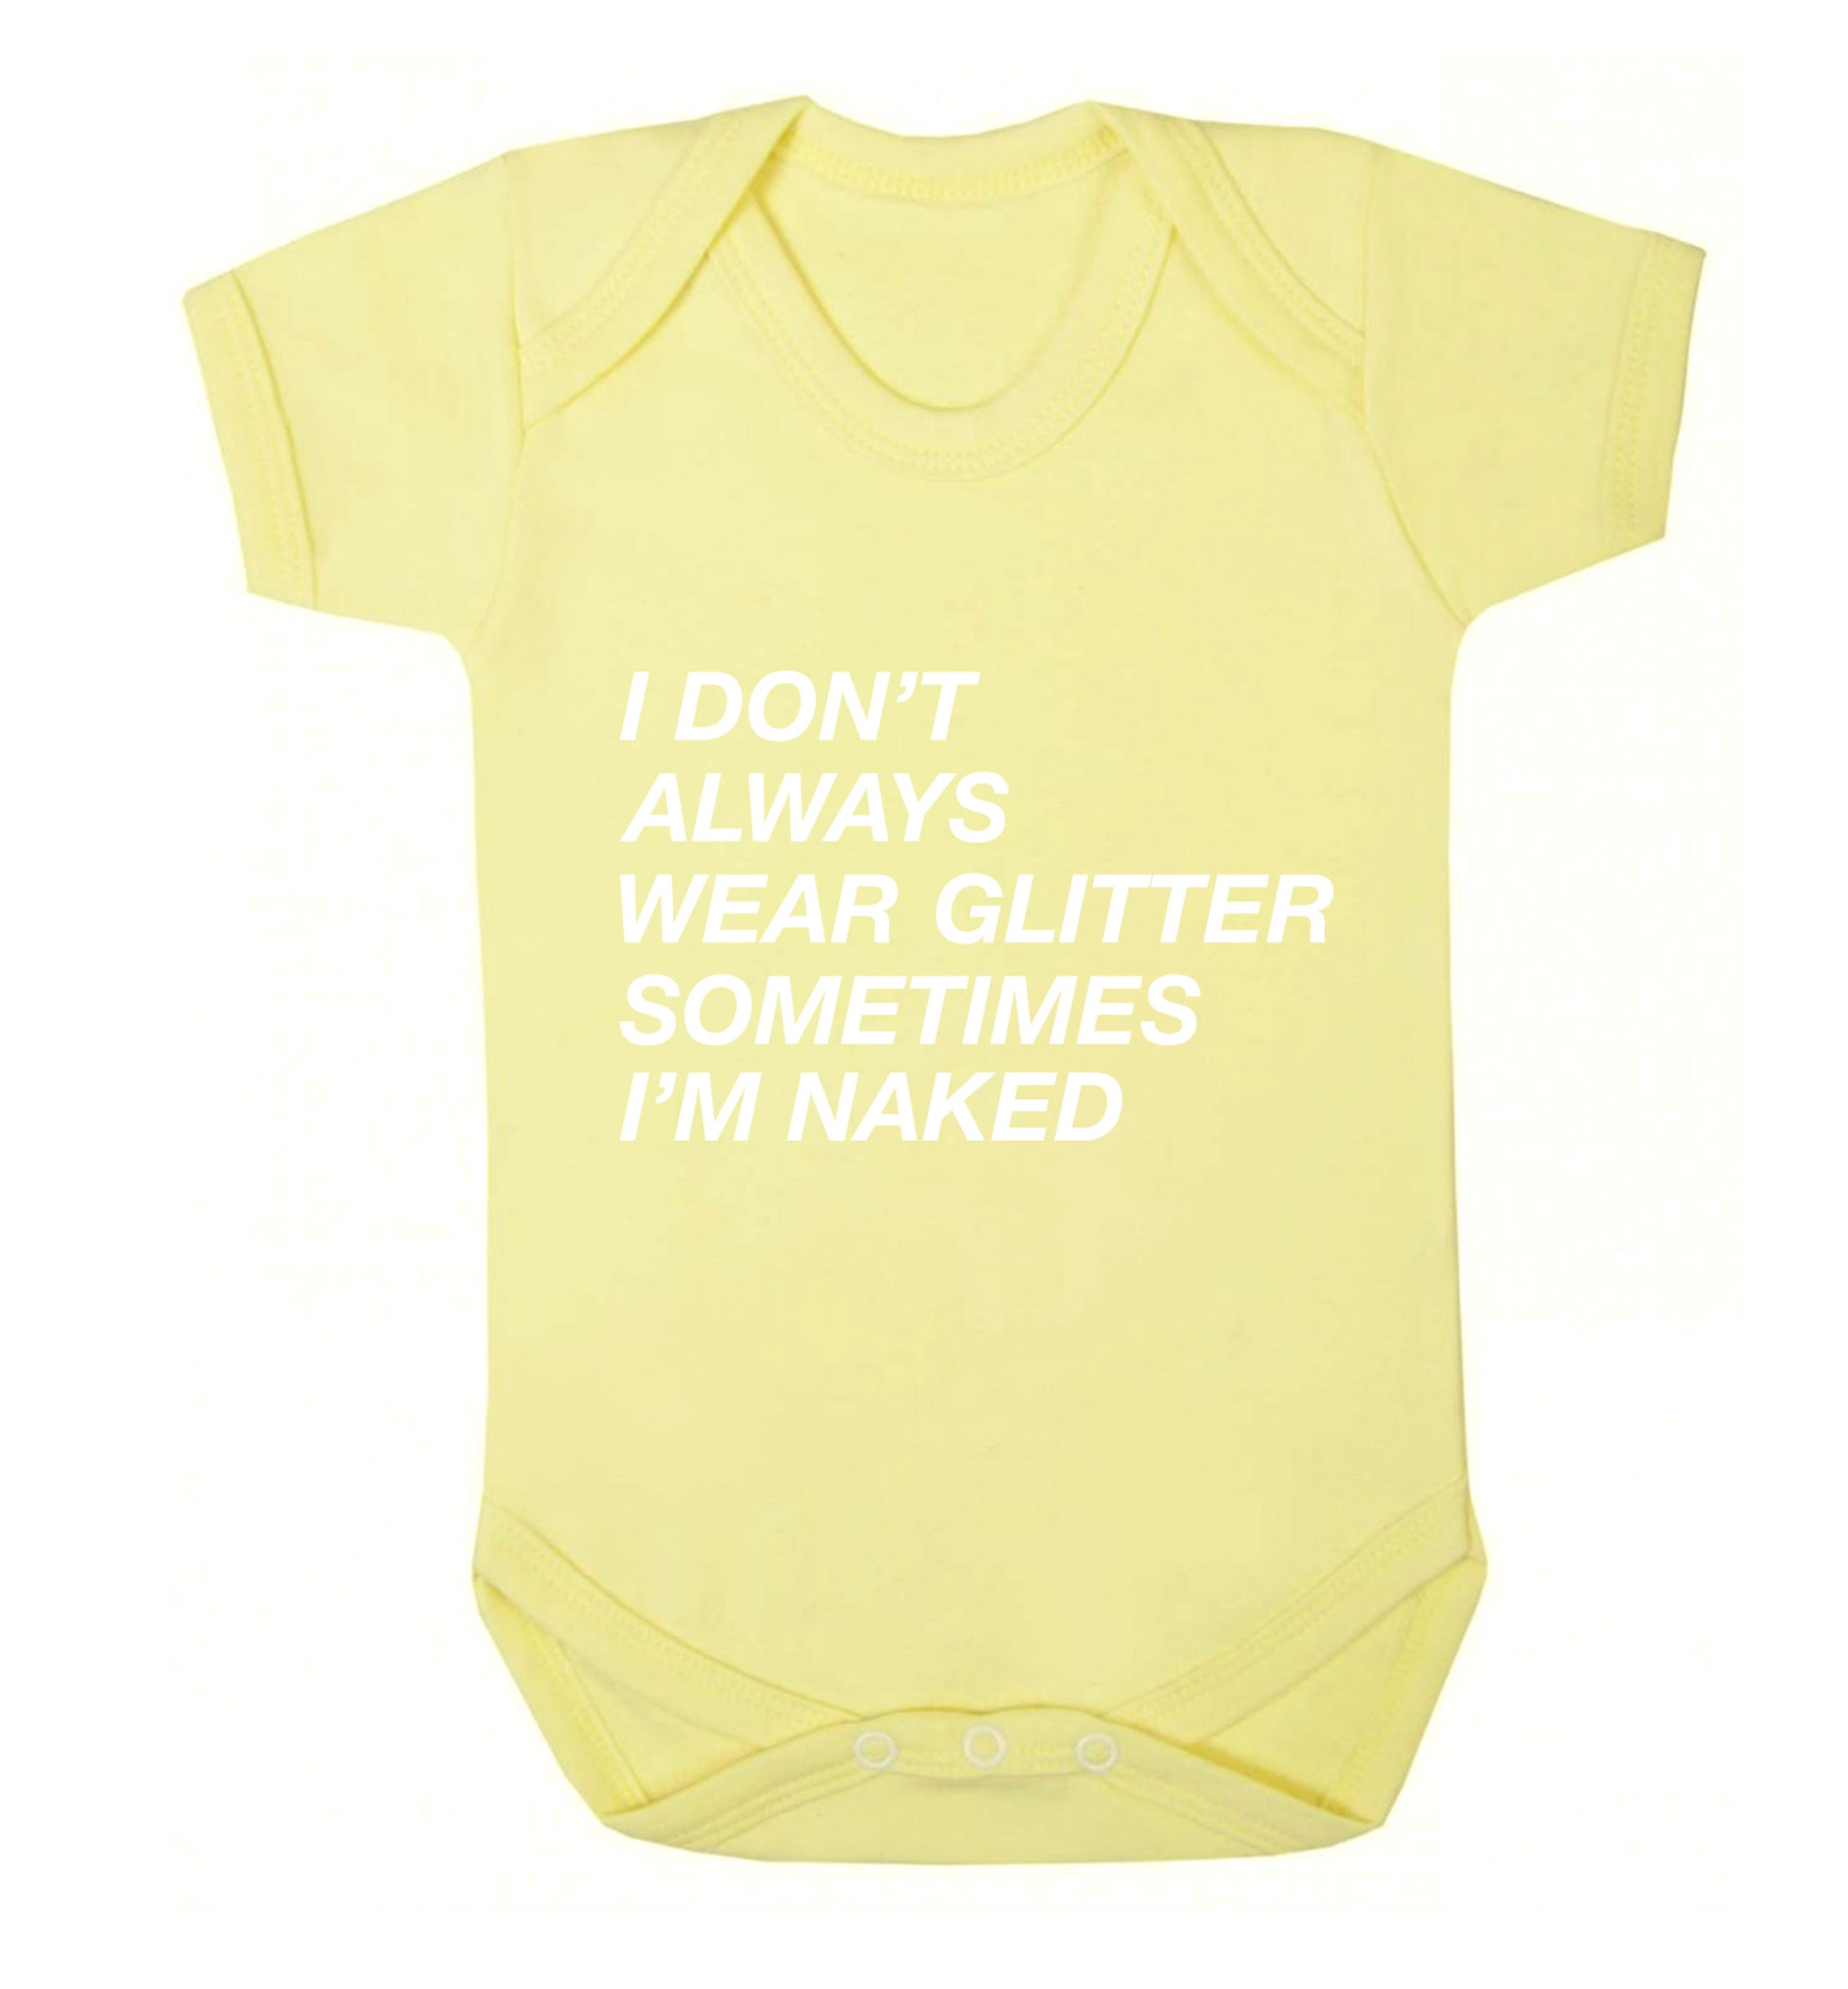 I don't always wear glitter sometimes I'm naked! Baby Vest pale yellow 18-24 months